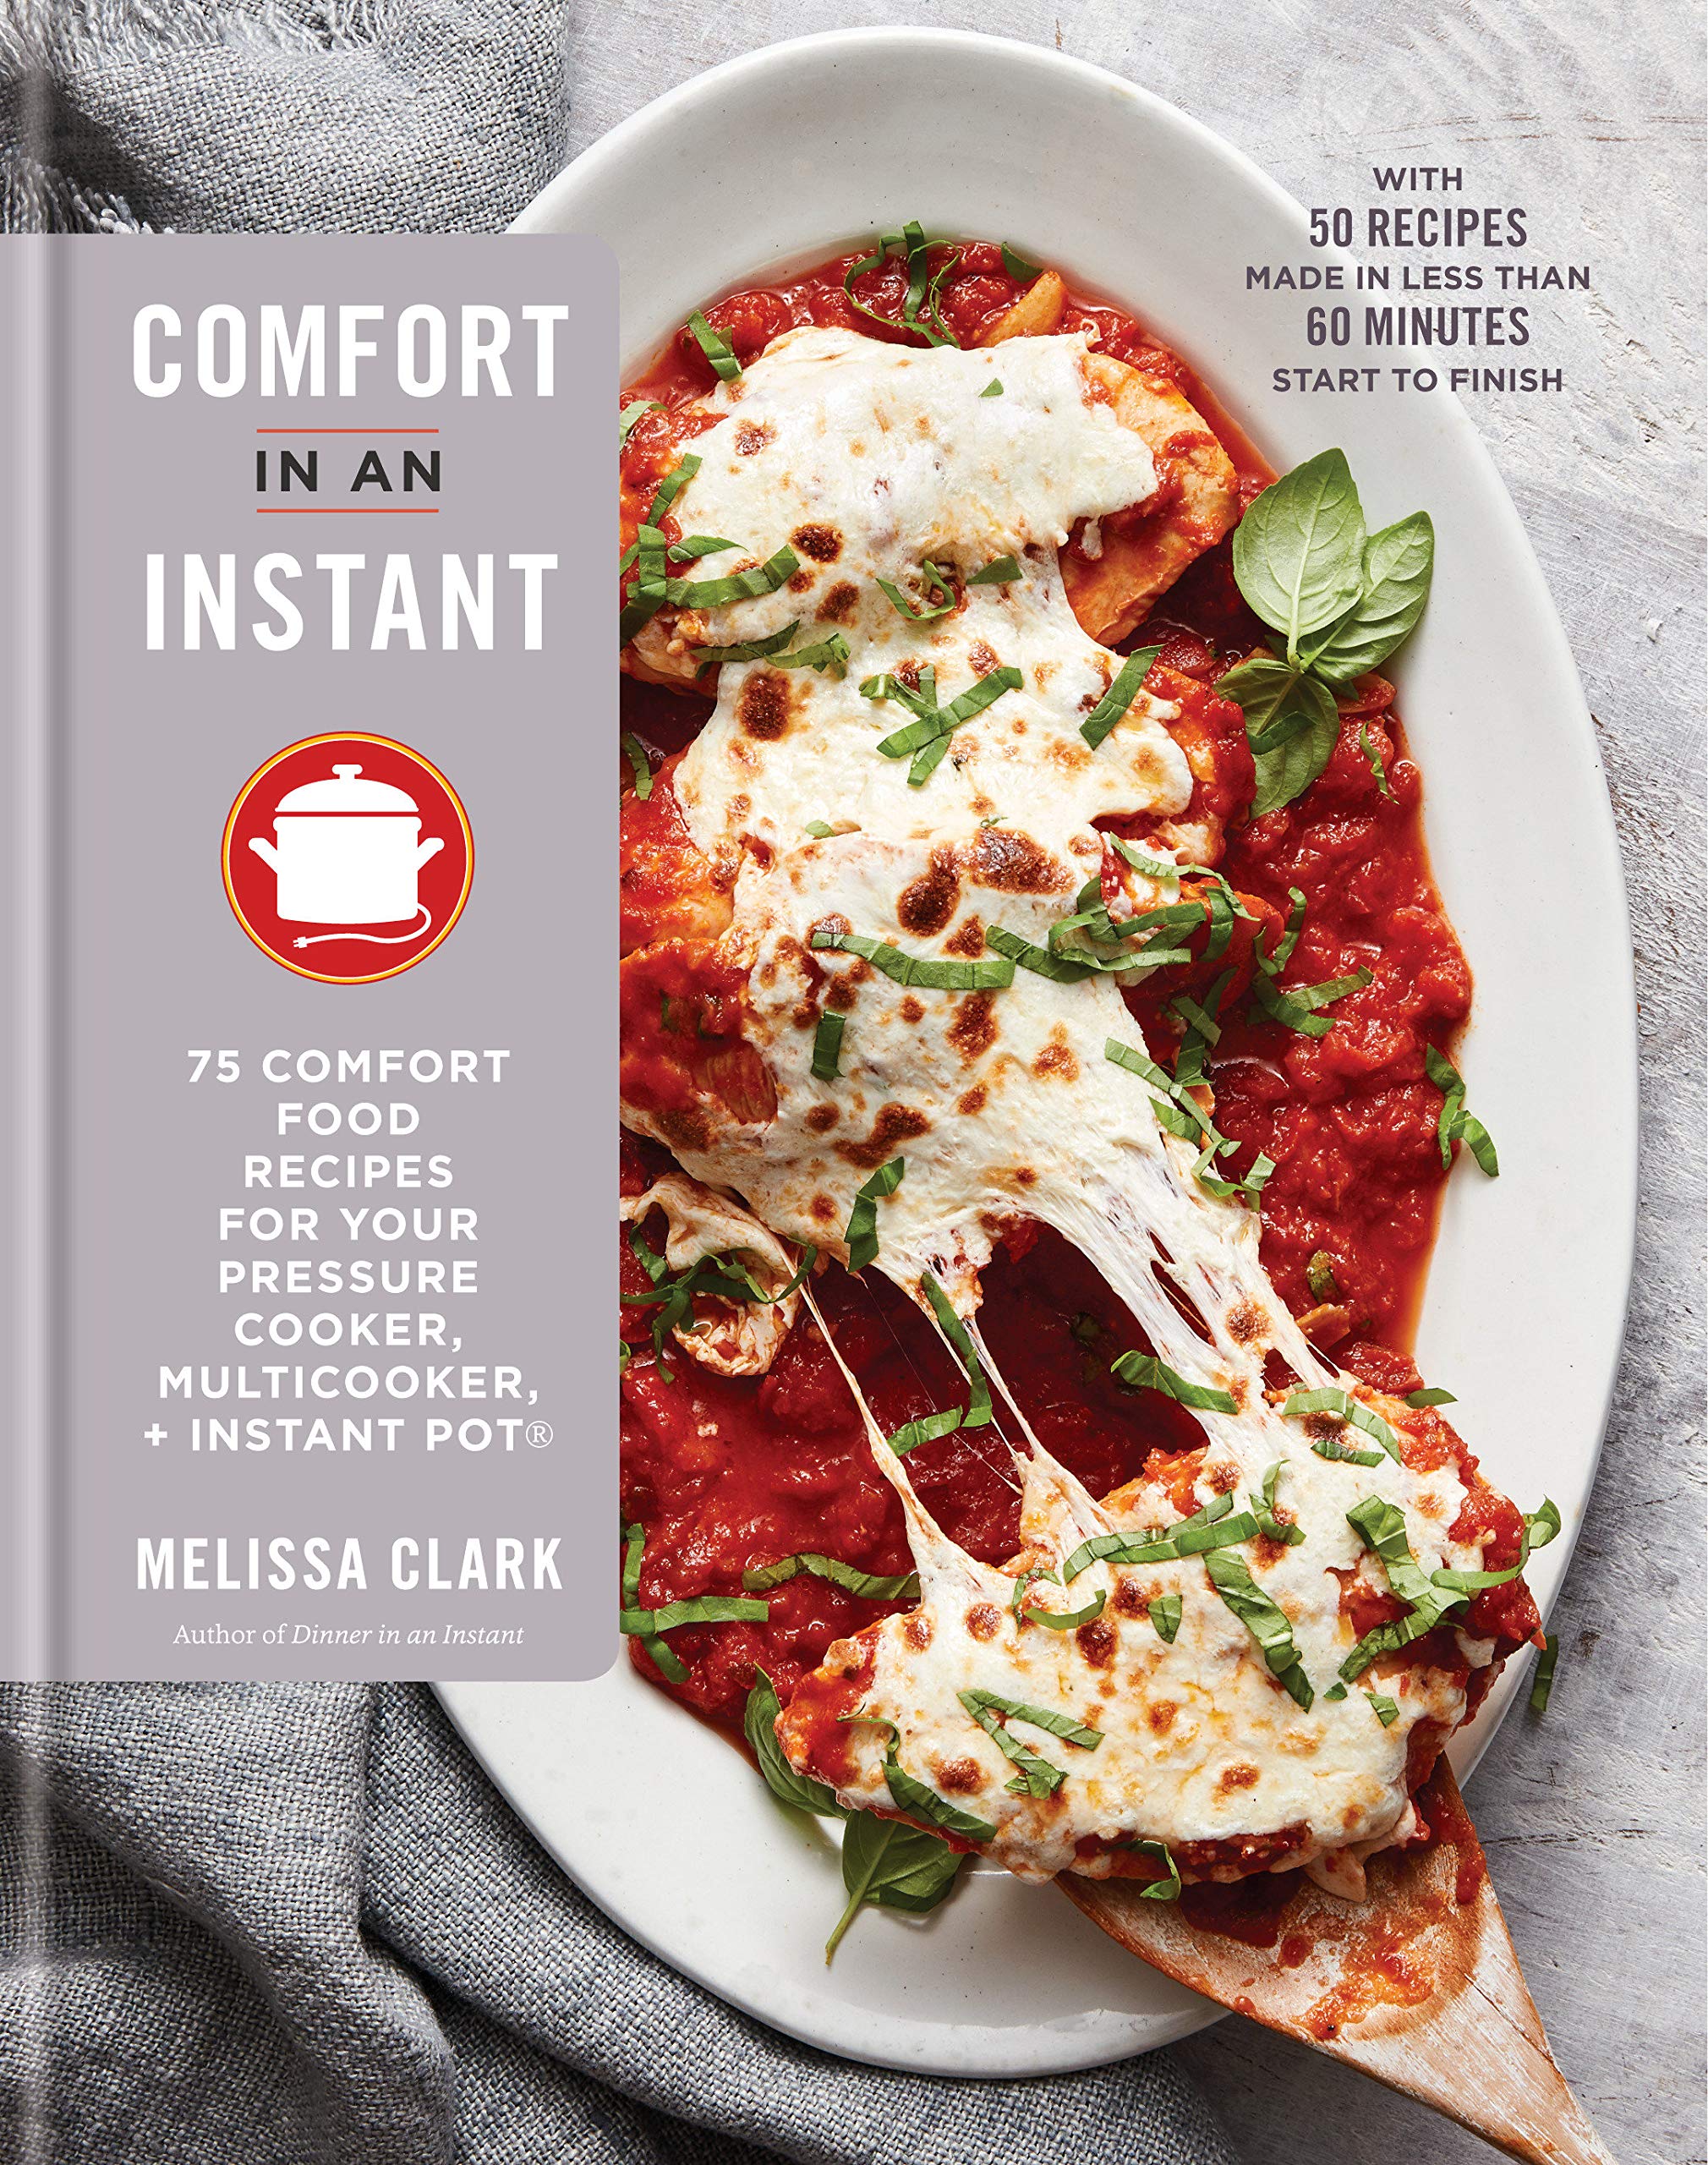 Comfort in an Instant: 75 Comfort Food Recipes for Your Pressure Cooker, Multicooker, and Instant Pot®: A Cookbook (Melissa Clark) *Signed*